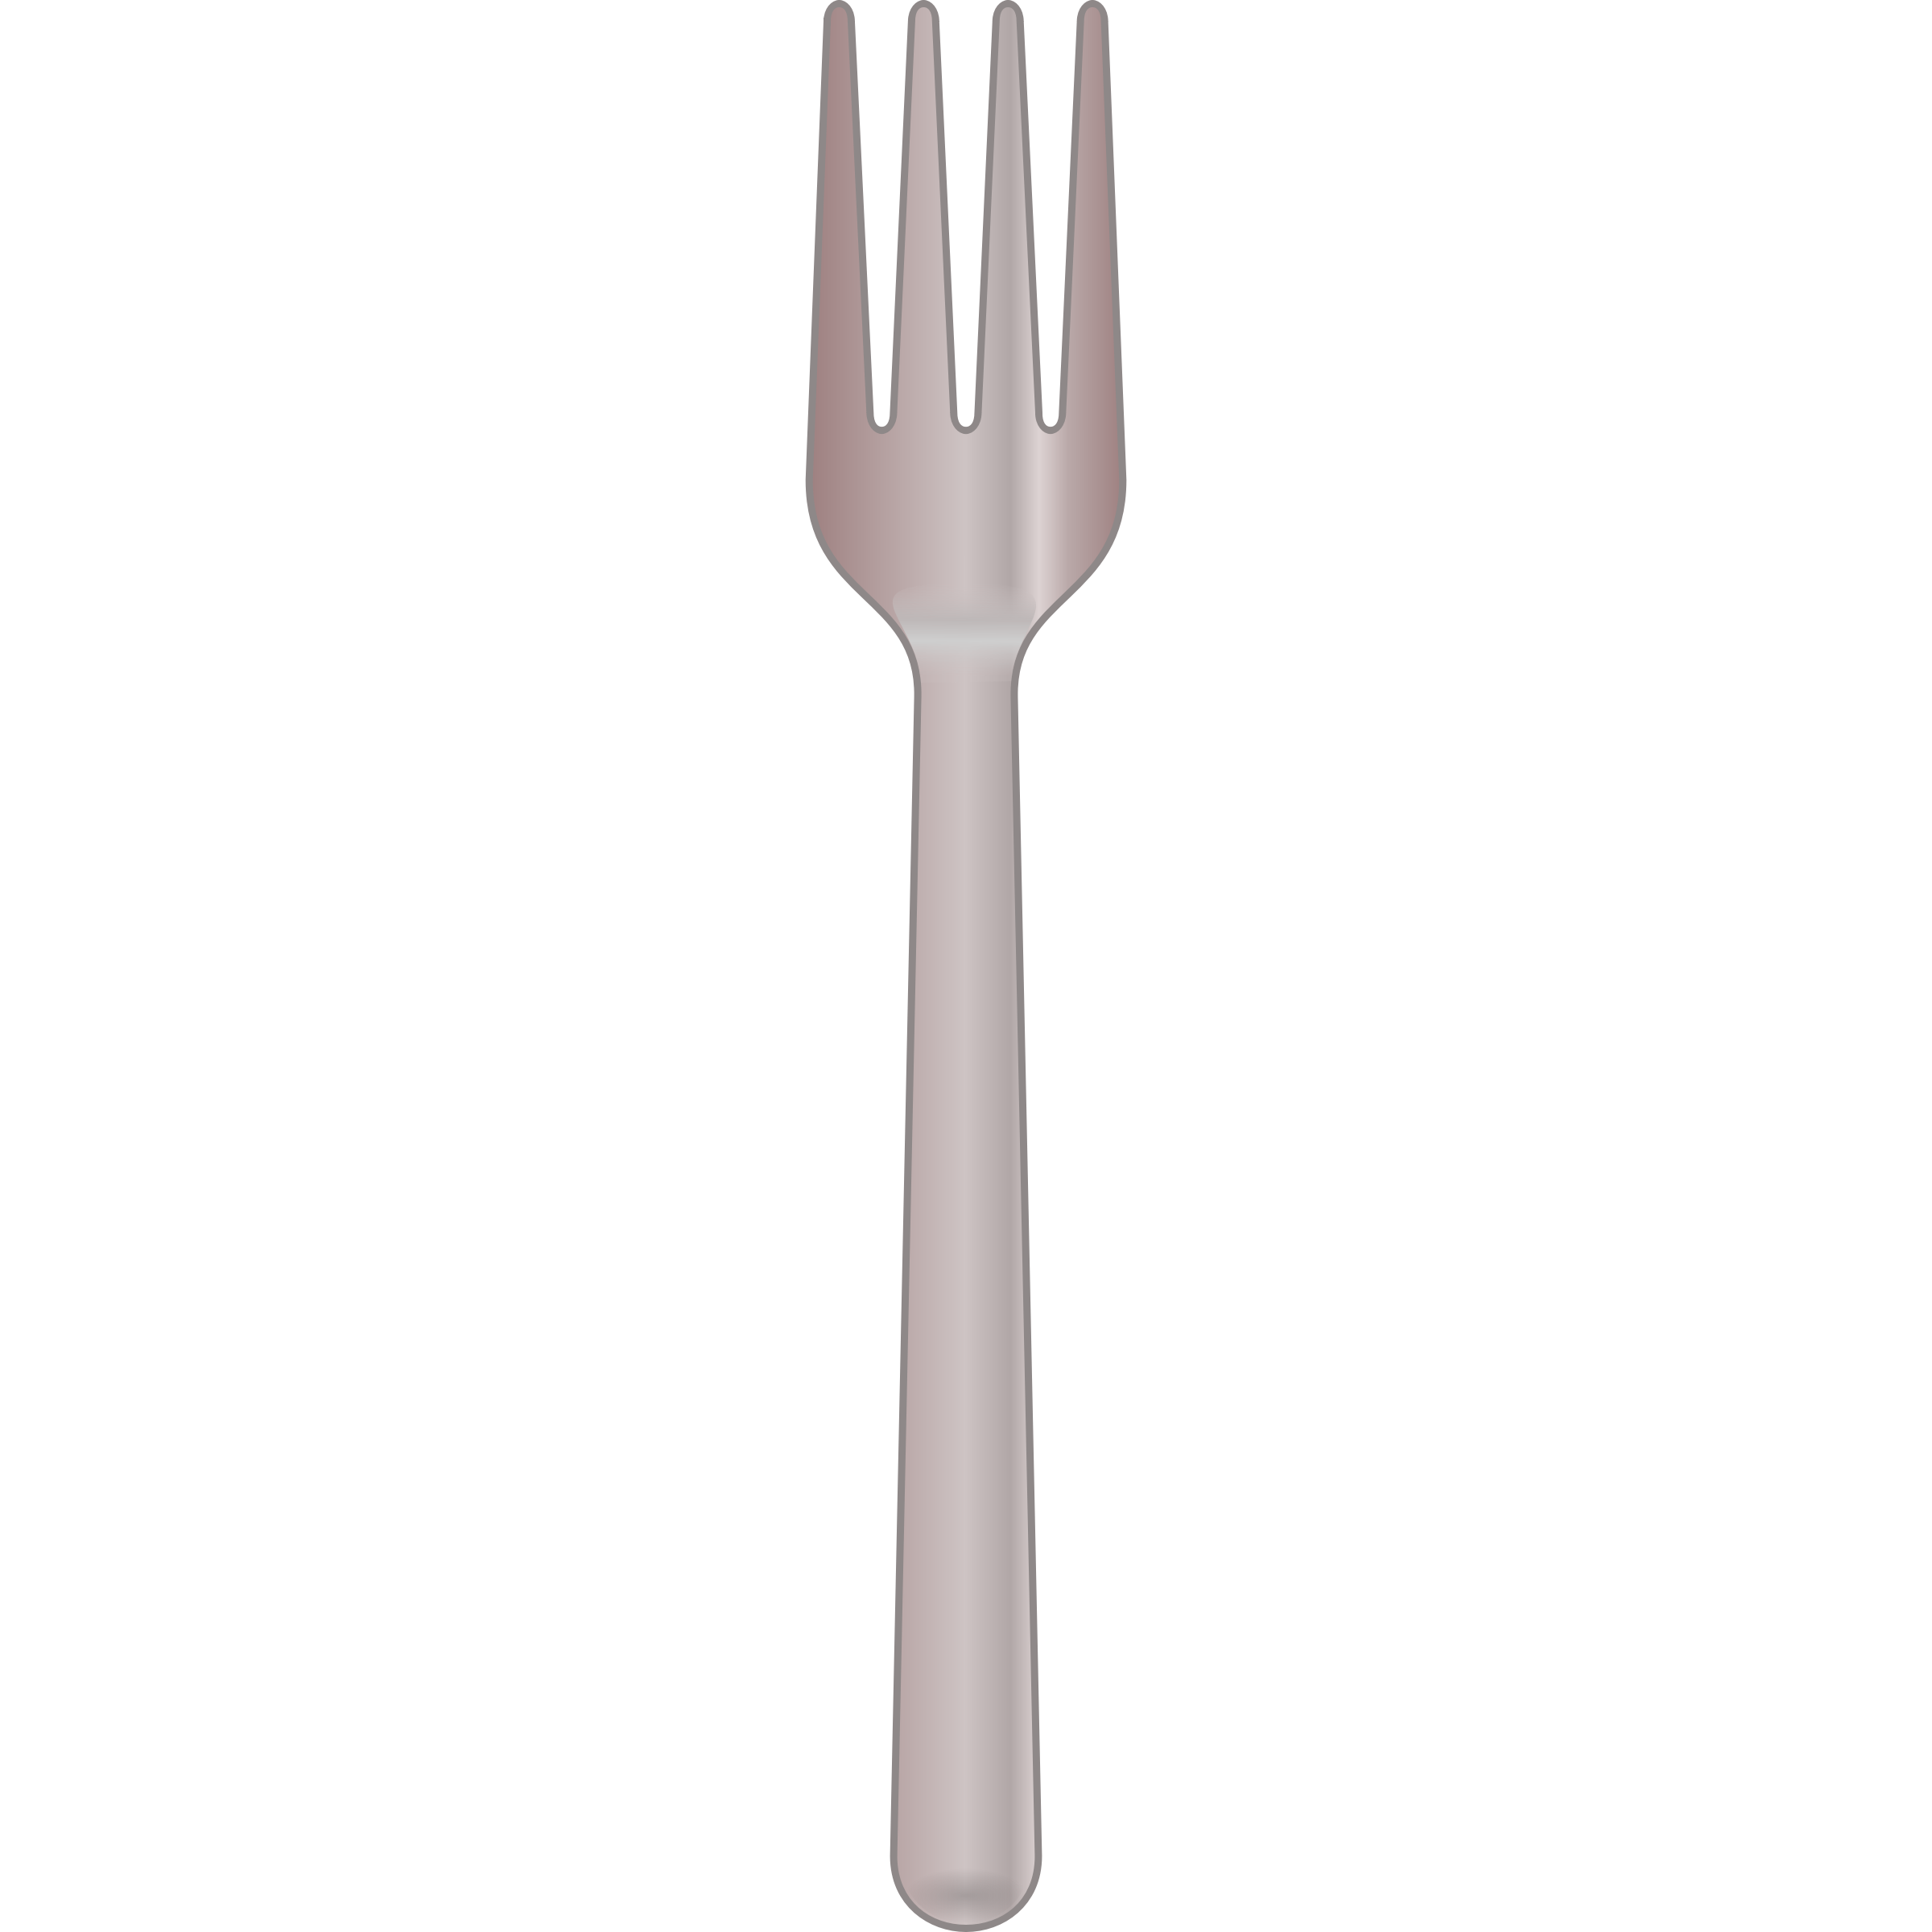 Other Clipart : Flatware fork 